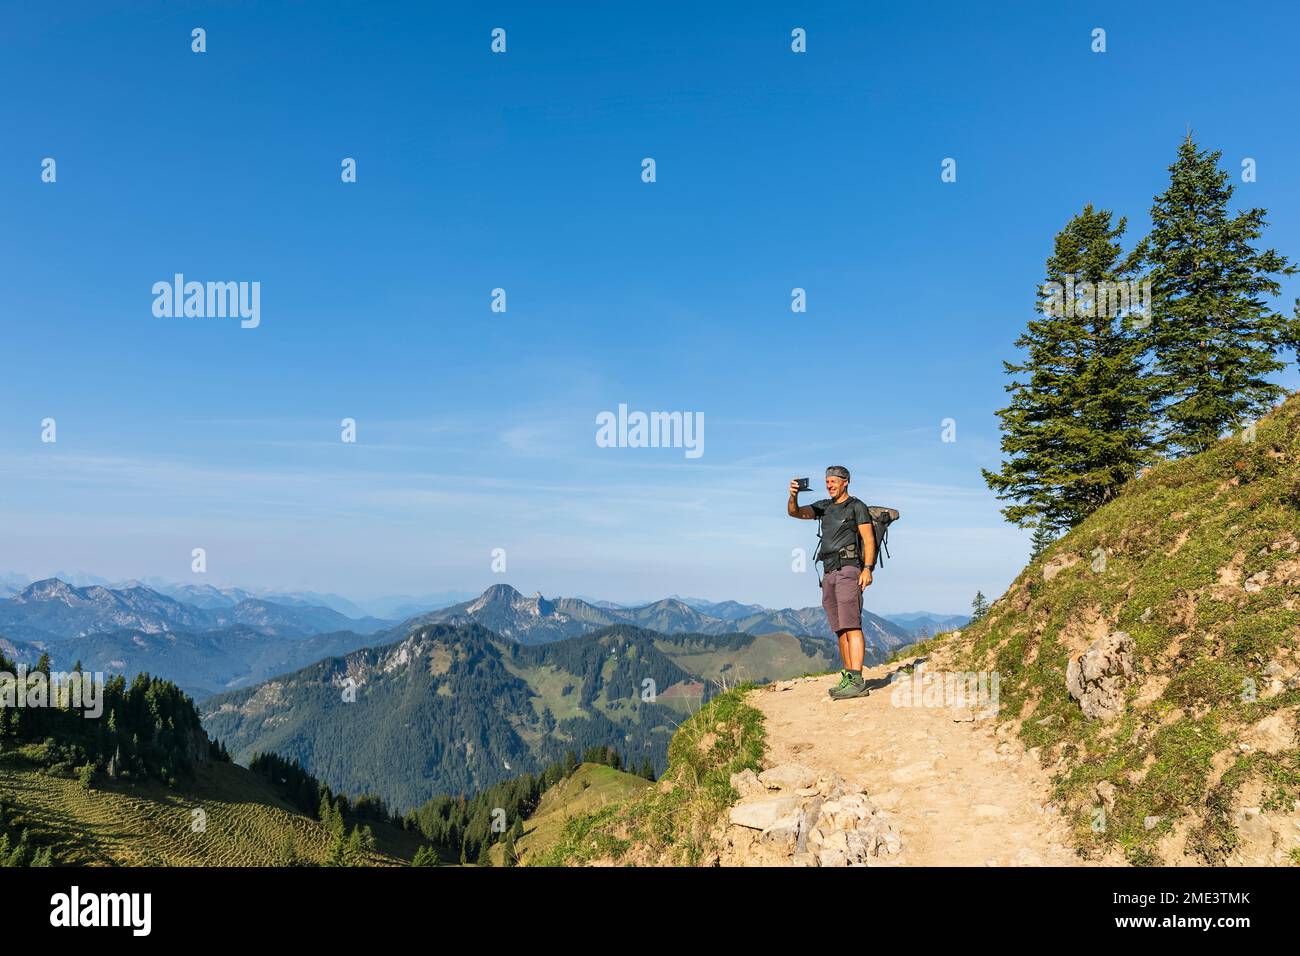 Germany, Bavaria, Male hiker taking photos on way to summit of Rotwand mountain Stock Photo